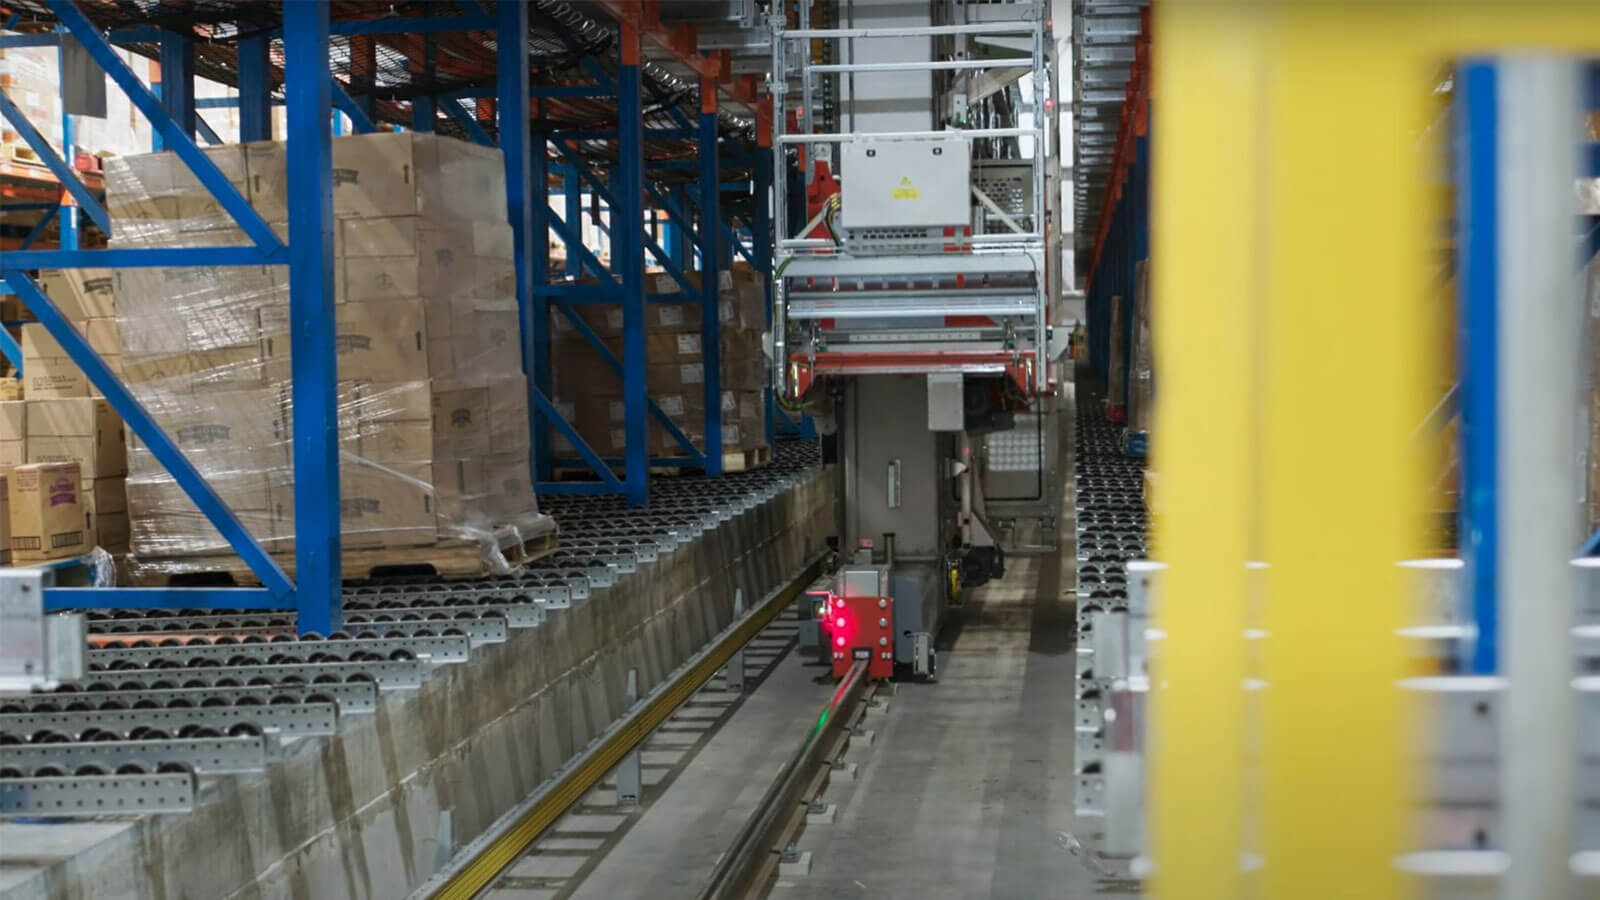 Automated Retrieval and Storage system in grocery distribution center